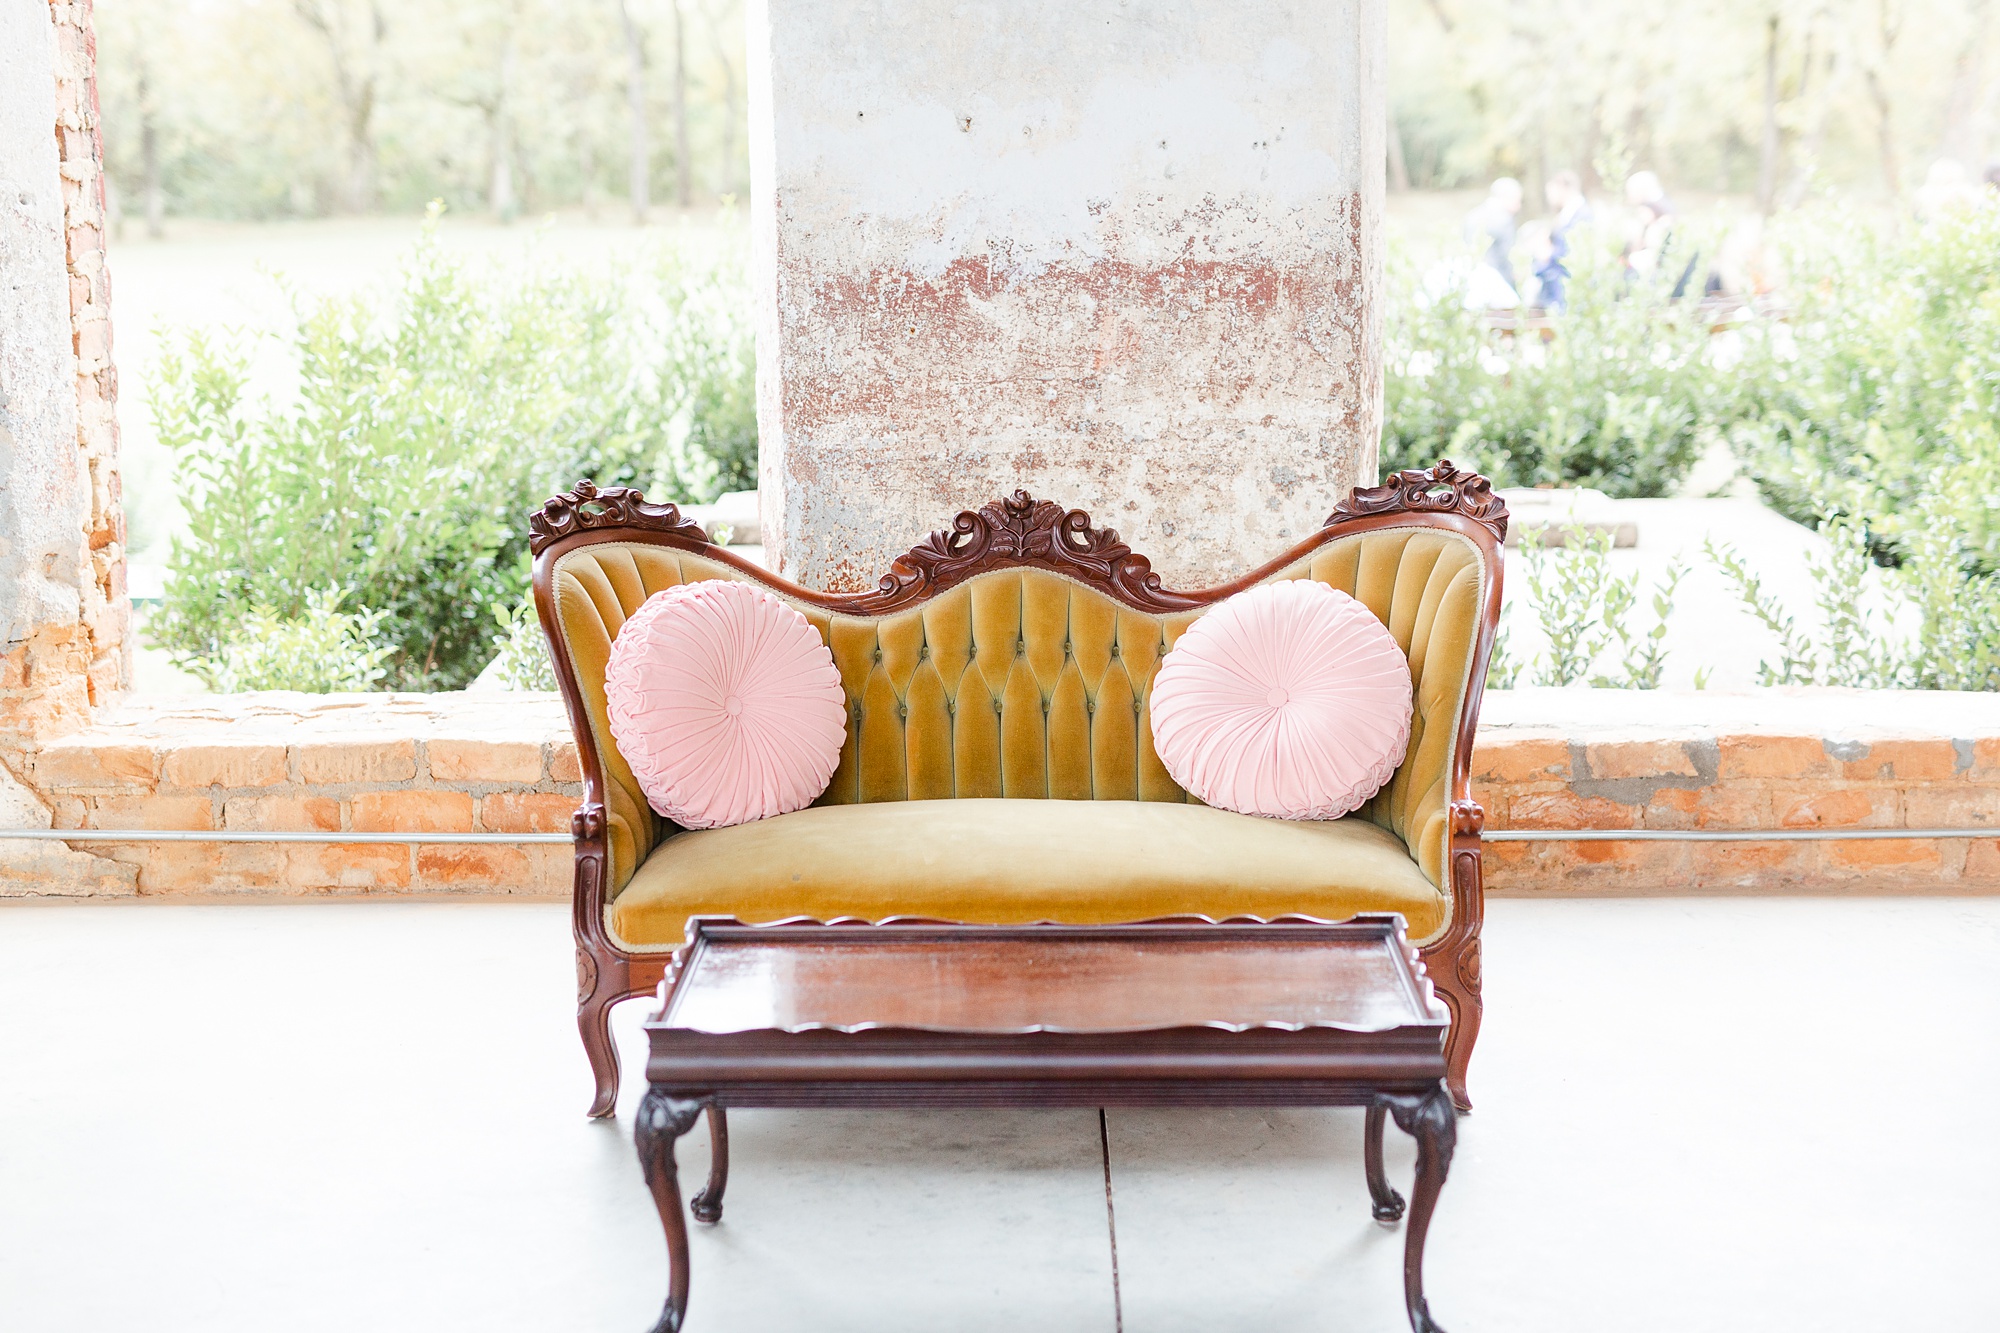 sitting area on vintage couch for Providence Cotton Mill wedding reception